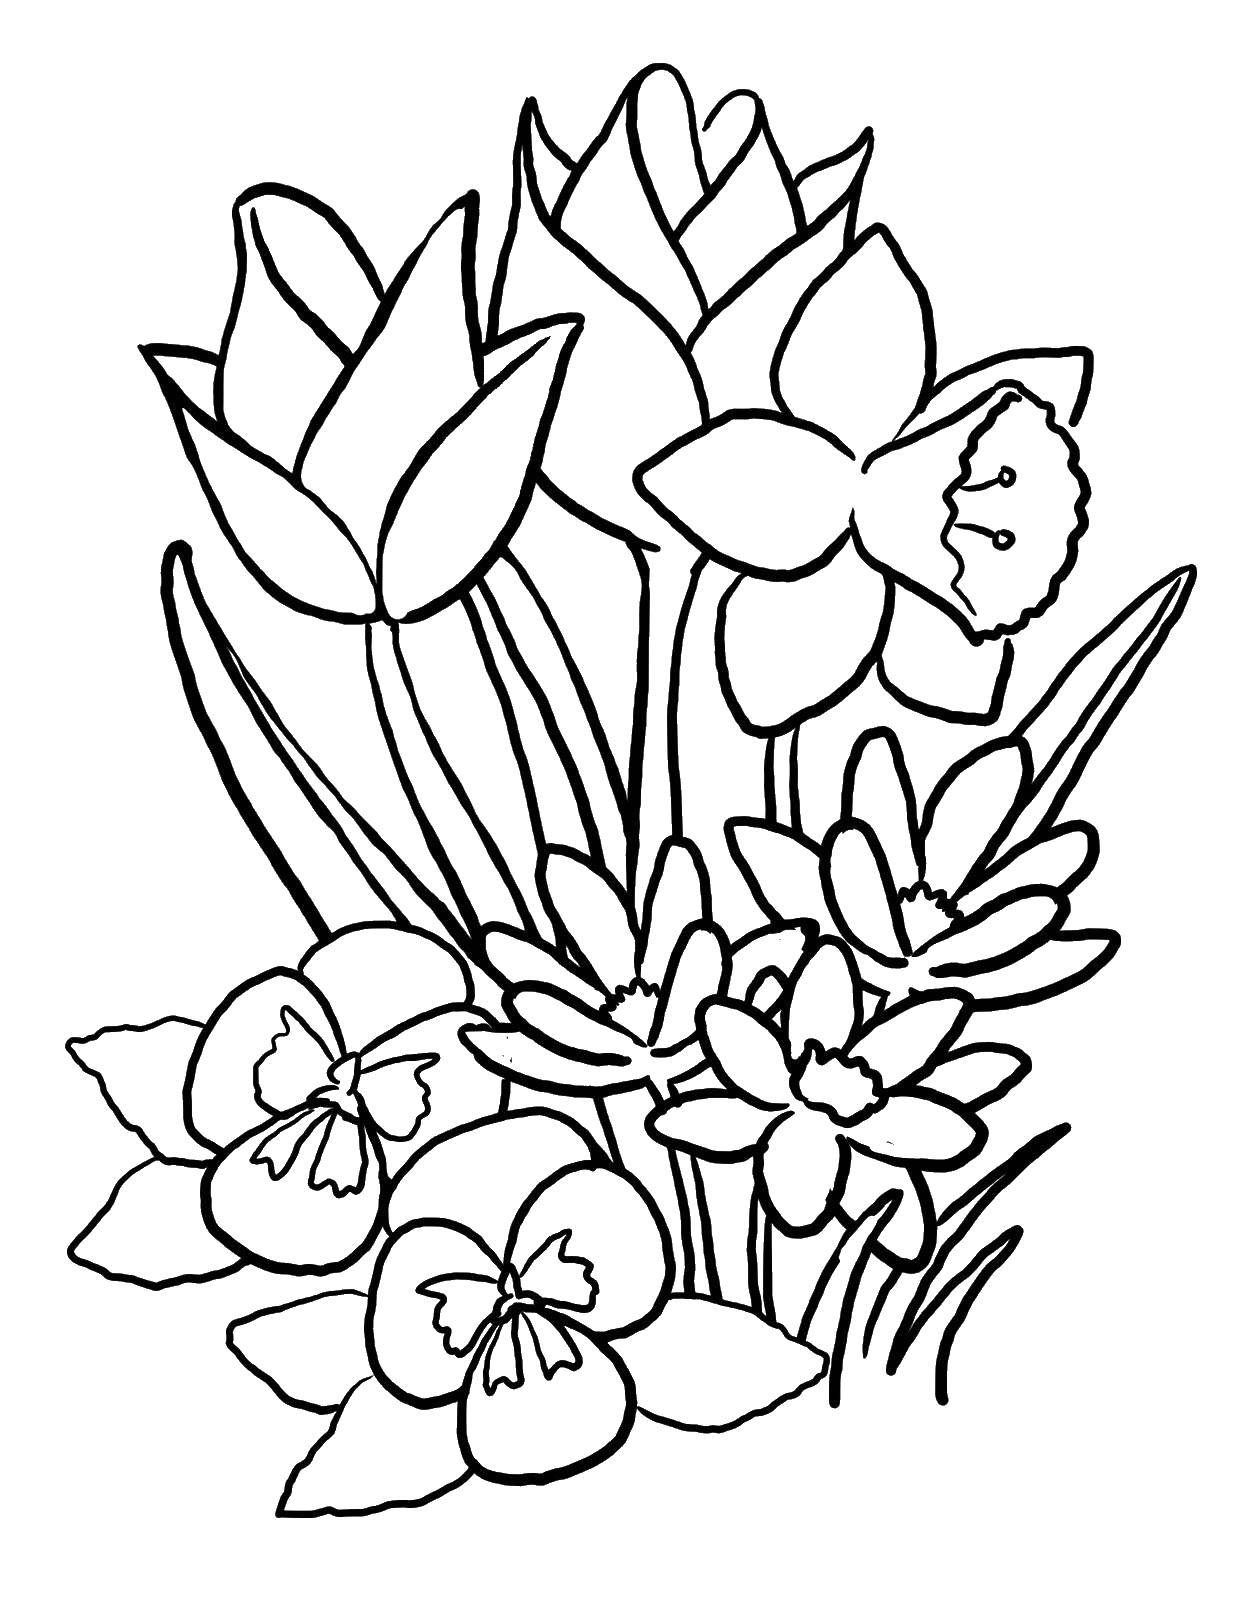 Coloring Daffodils. Category flowers. Tags:  Flowers, Narcissus.